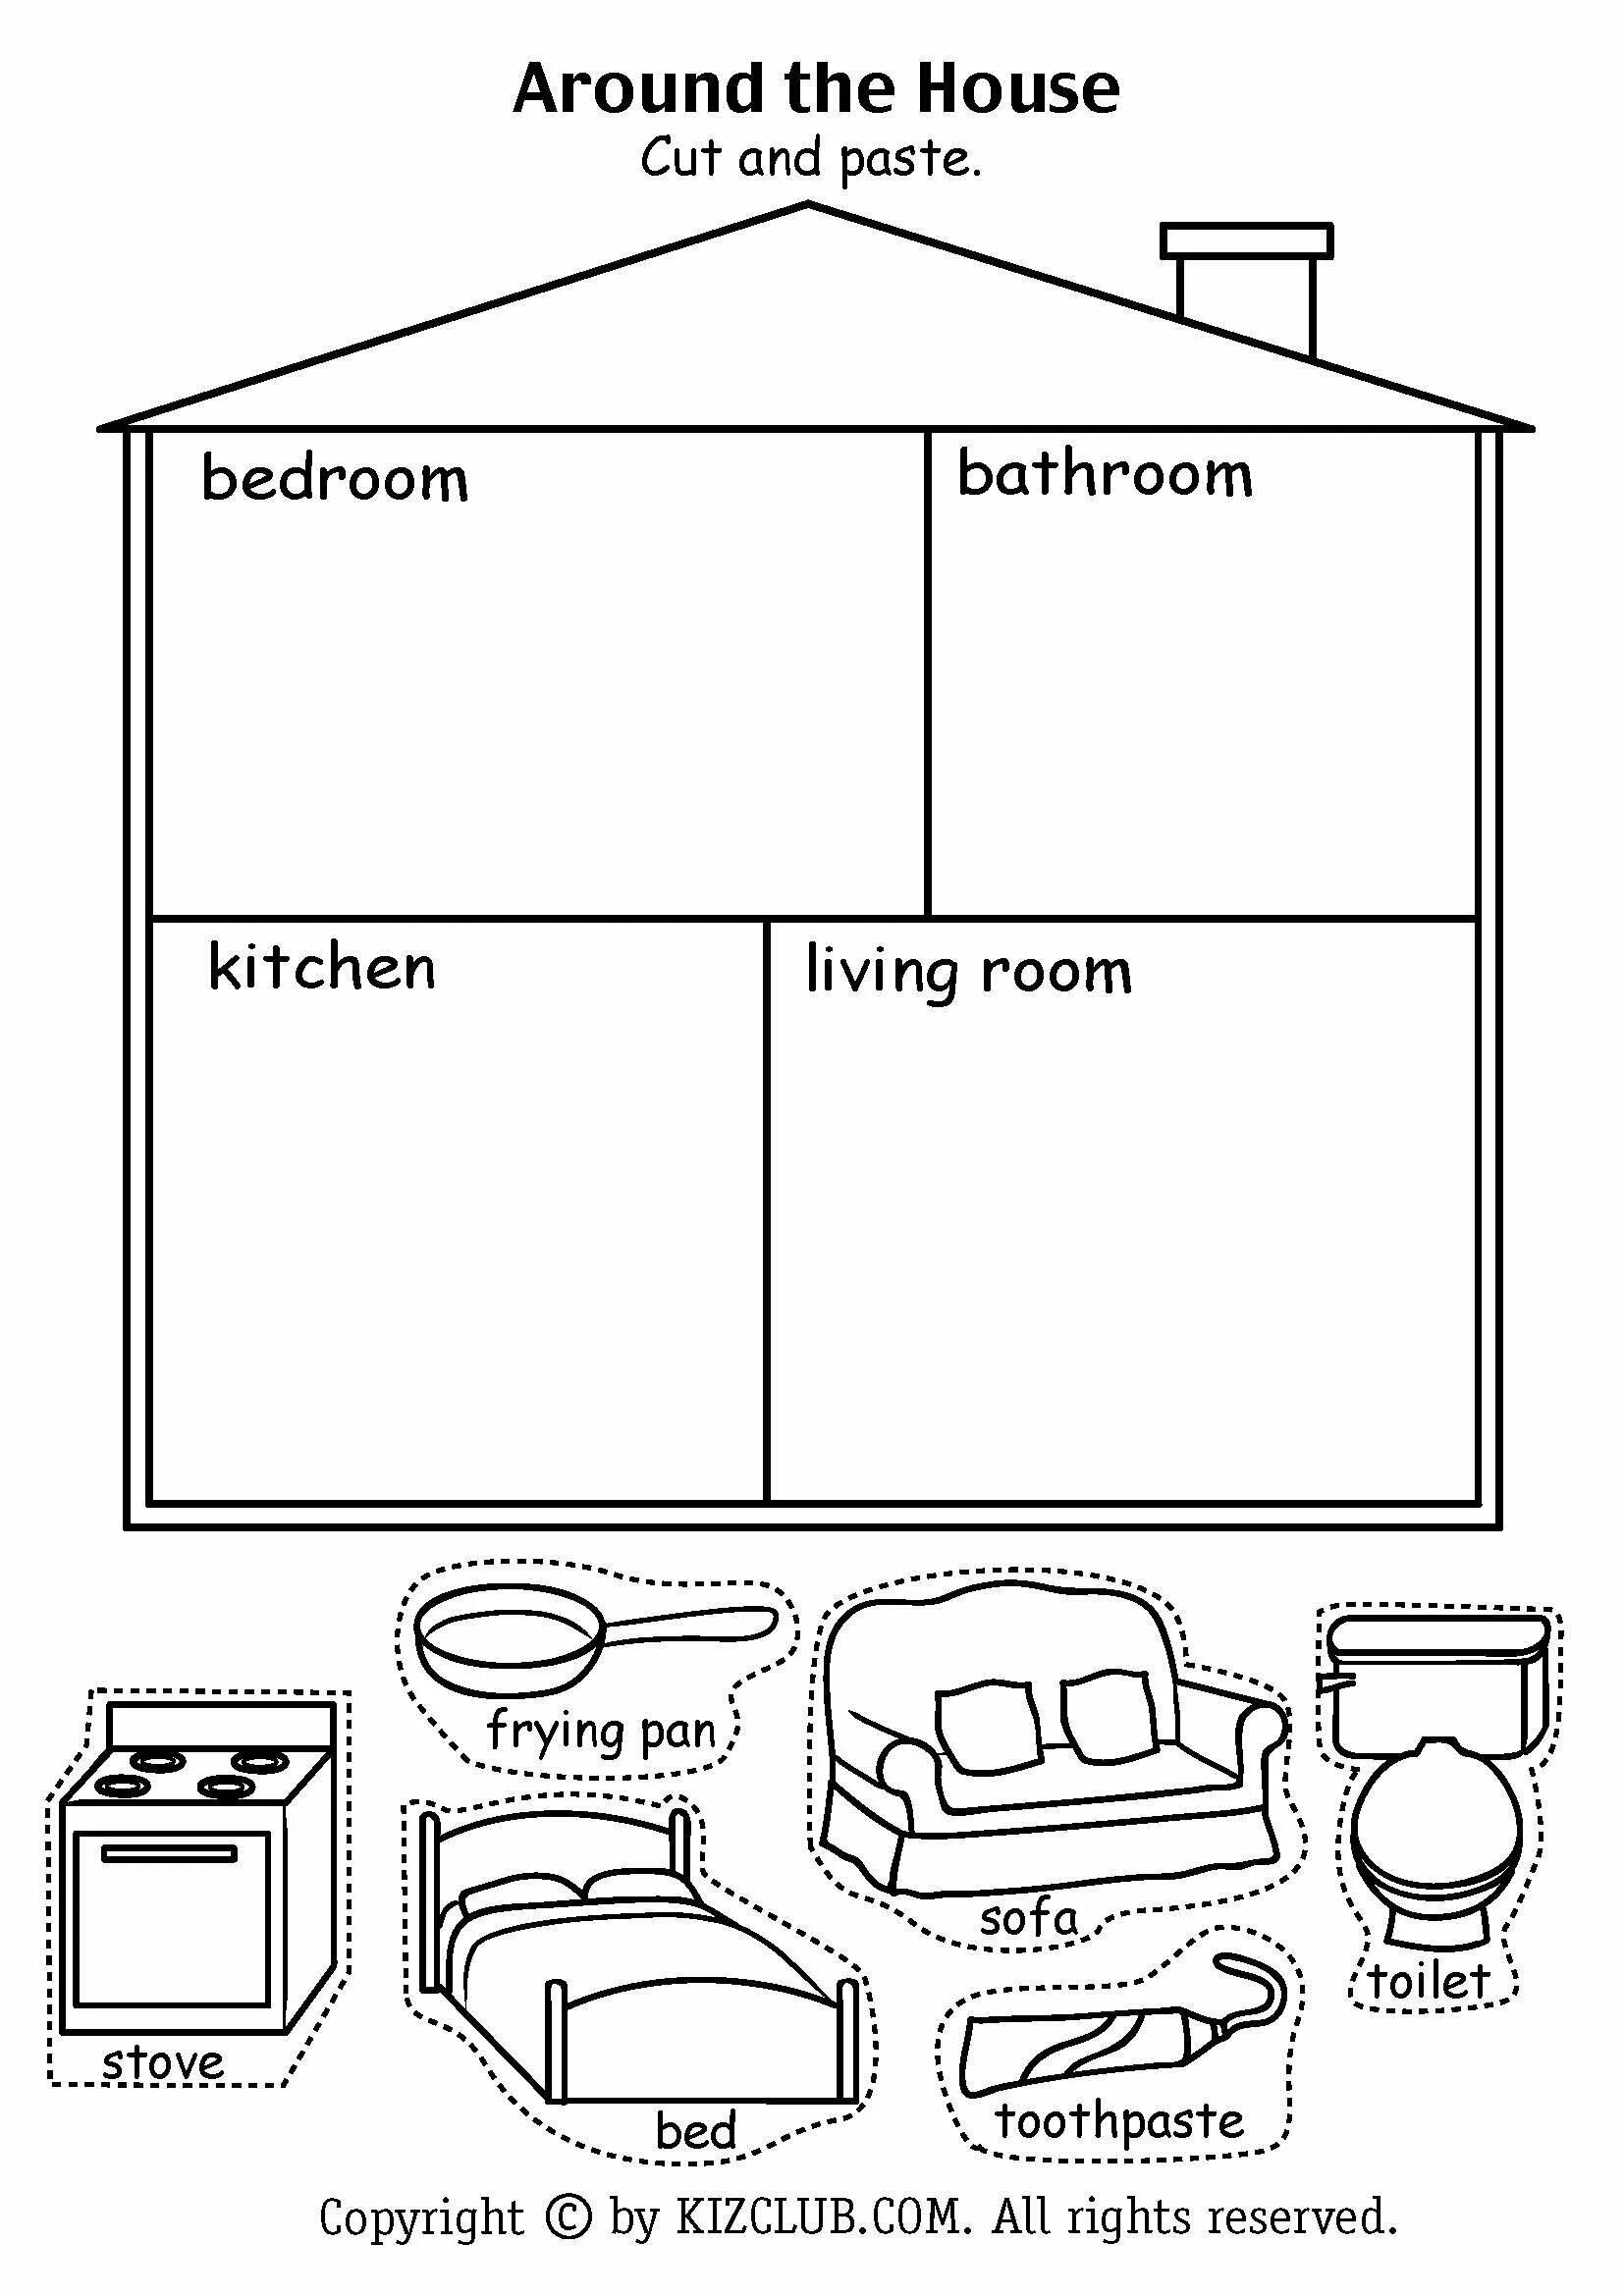 Английский язык Parts of the House kindergarden. Комнаты Worksheets for Kids. Rooms in the House задания. House задания для детей английский. My house на английском